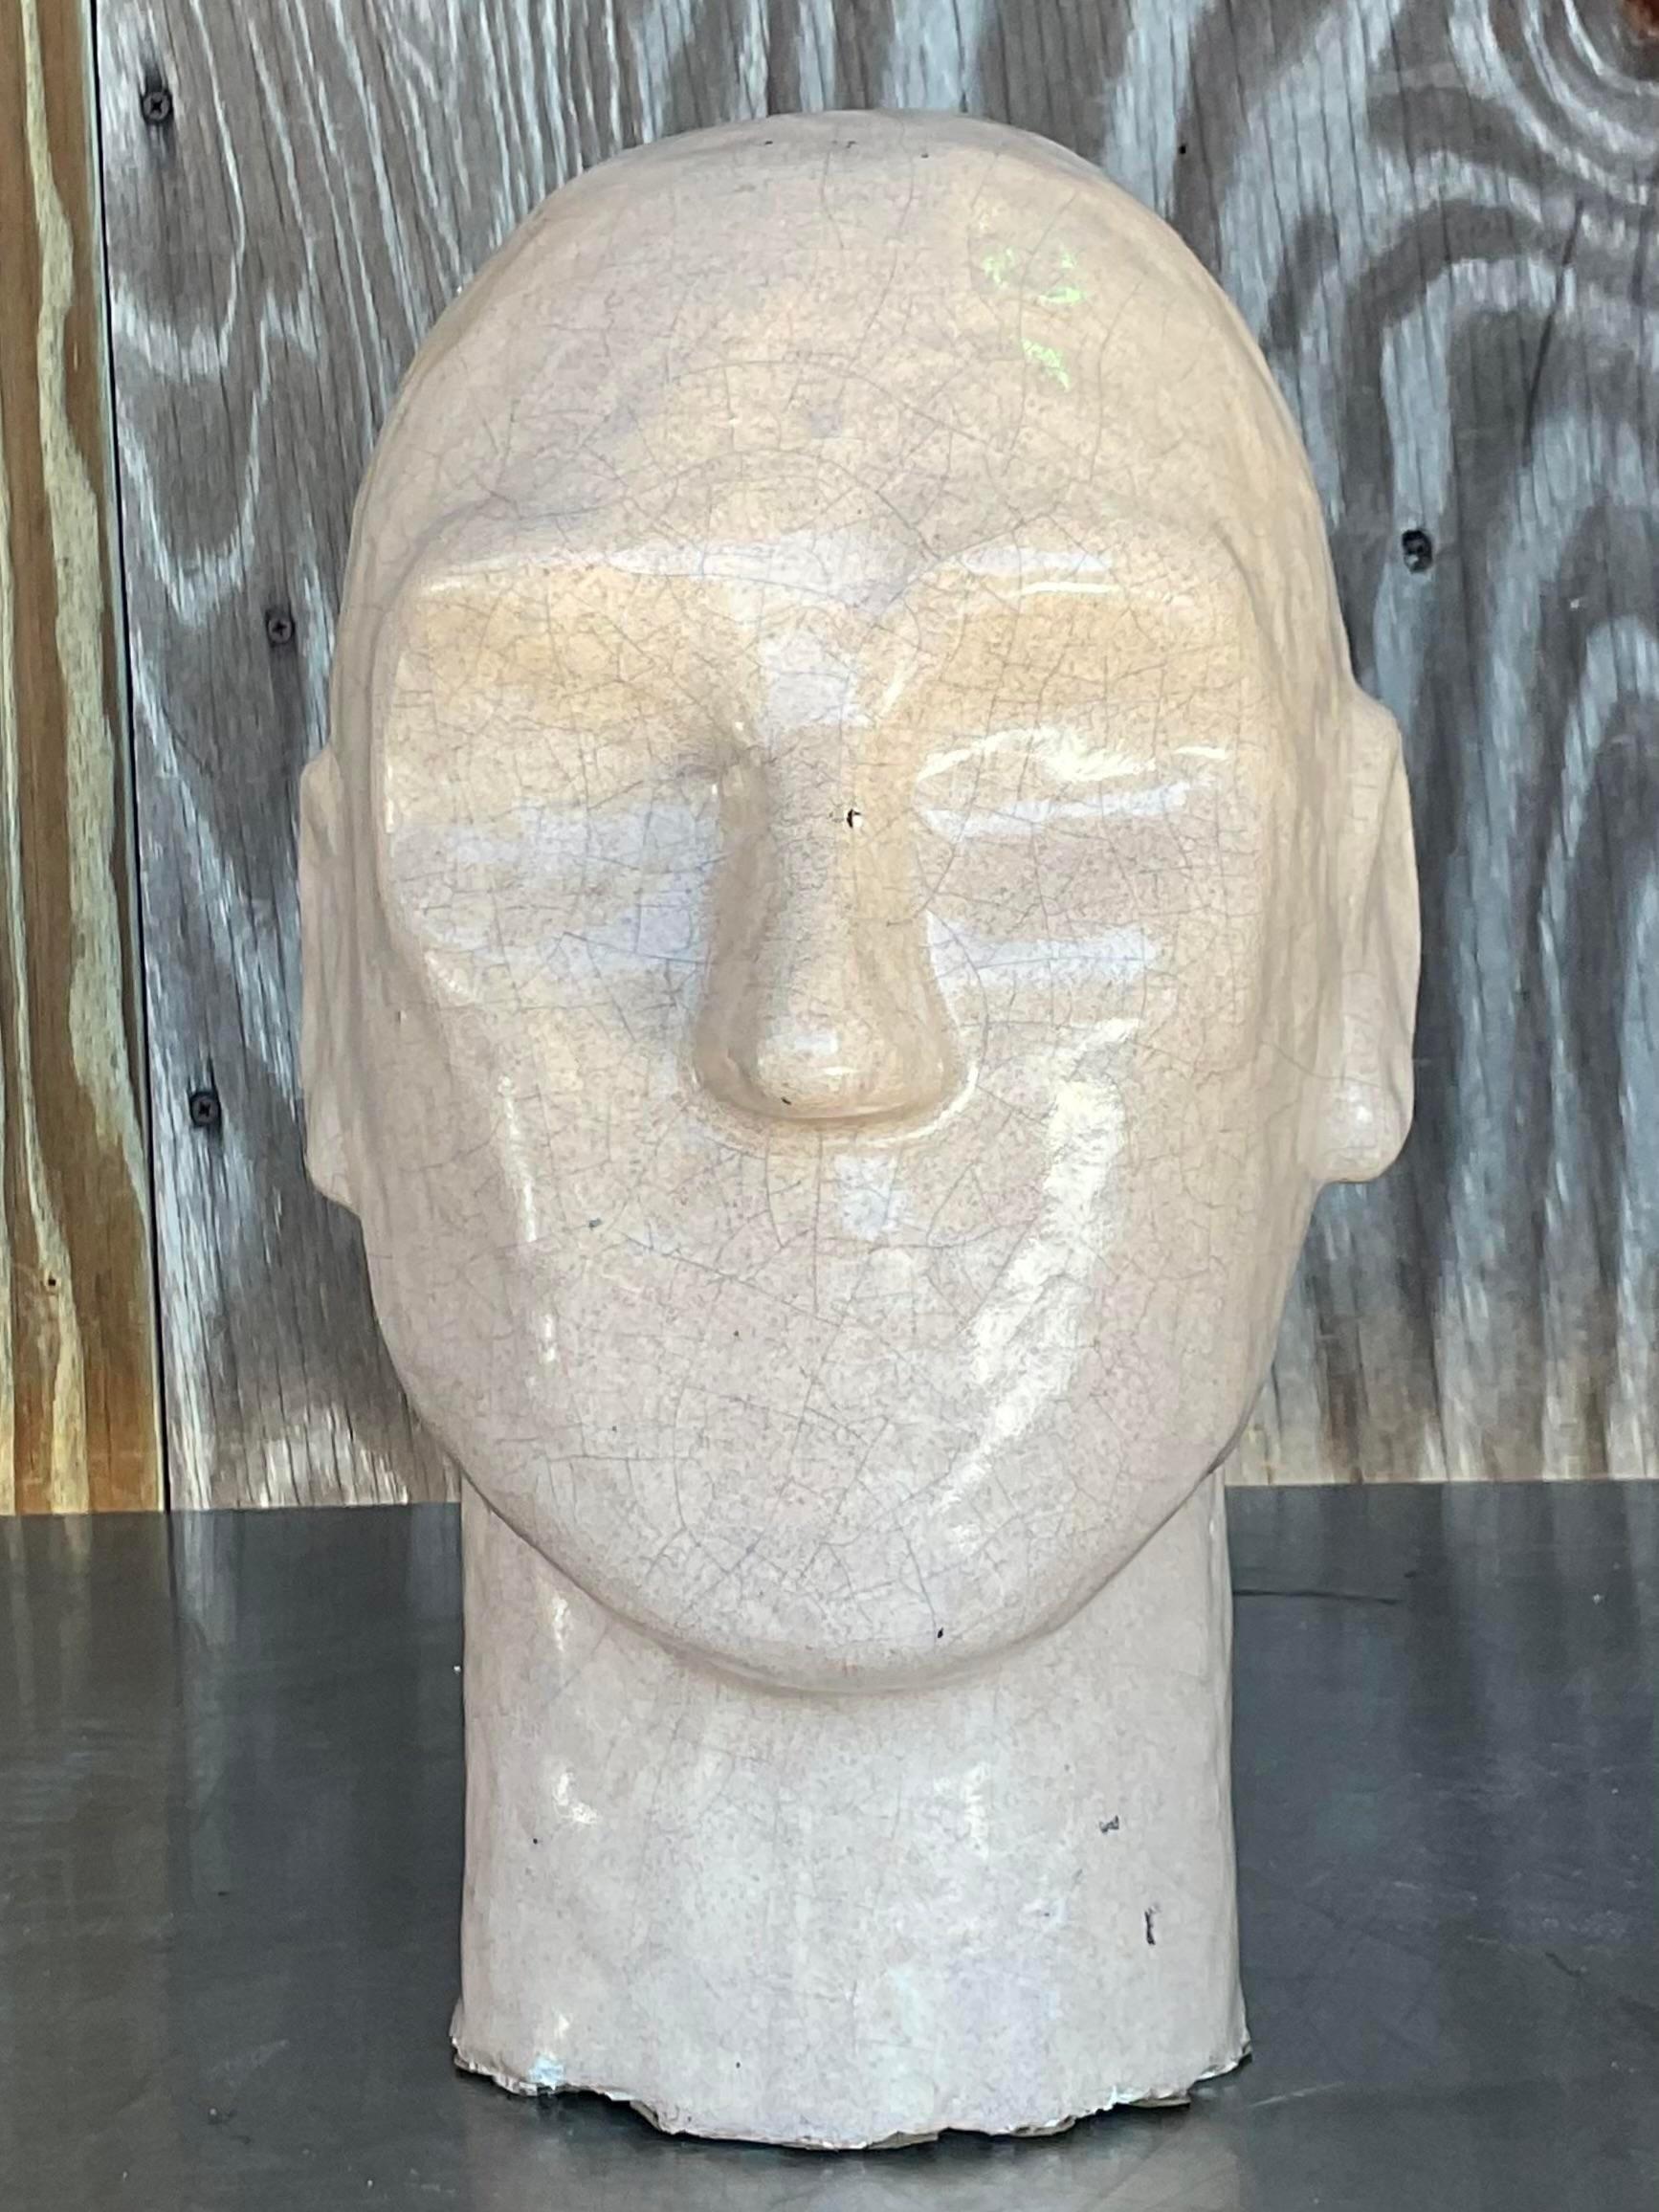 A fabulous vintage Boho hand made Ceramic sculpture. A chic artisan head in a glazed crackle finish. Acquired from a Palm Beach estate.